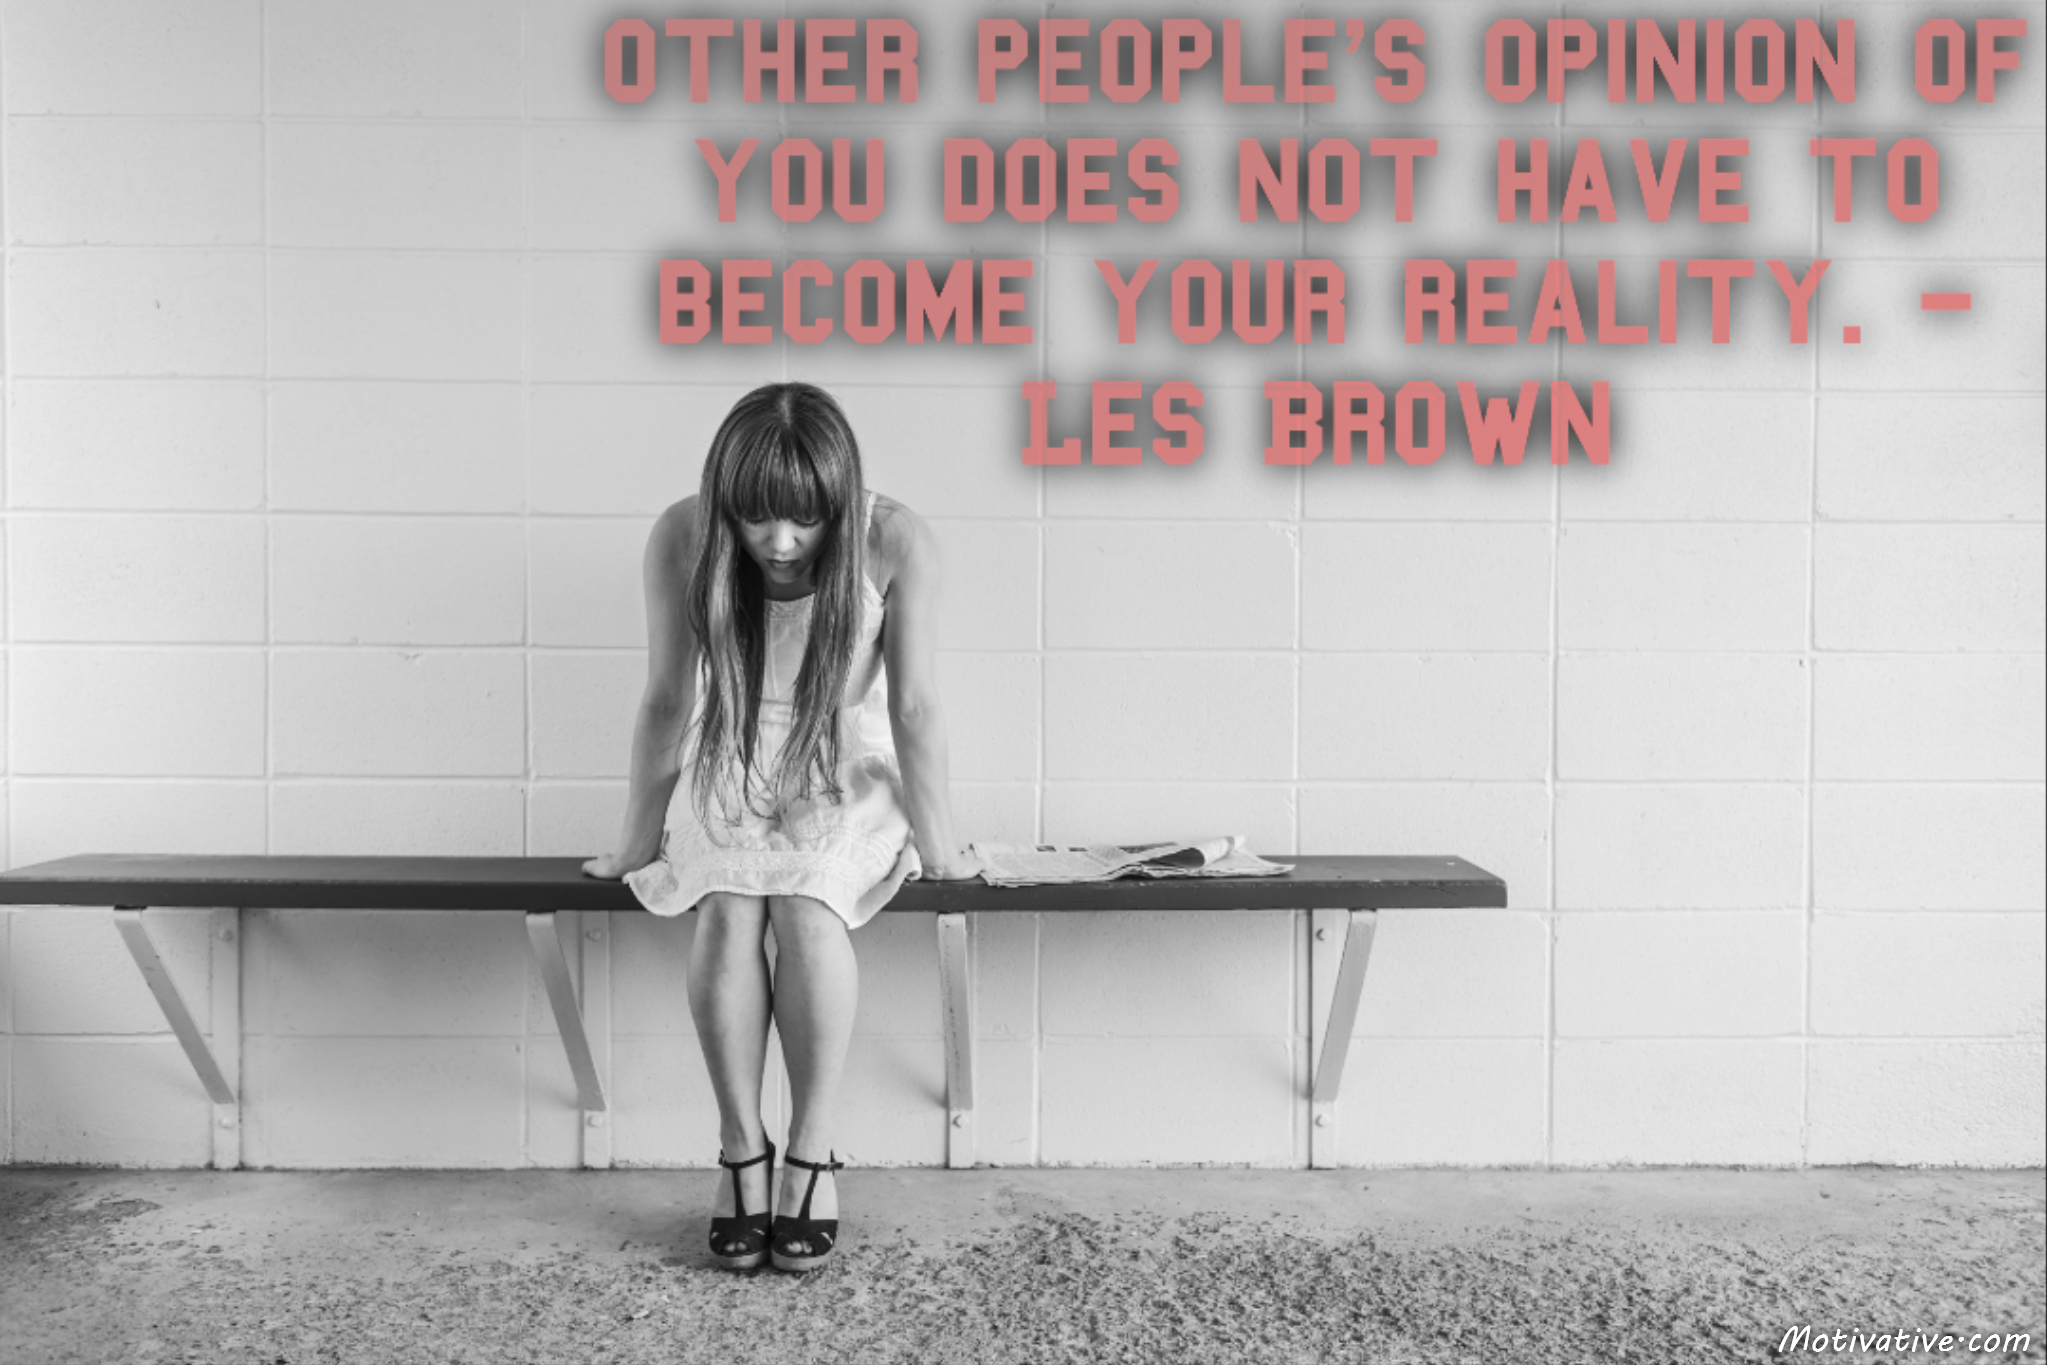 Other people’s opinion of you does not have to become your reality. – Les Brown